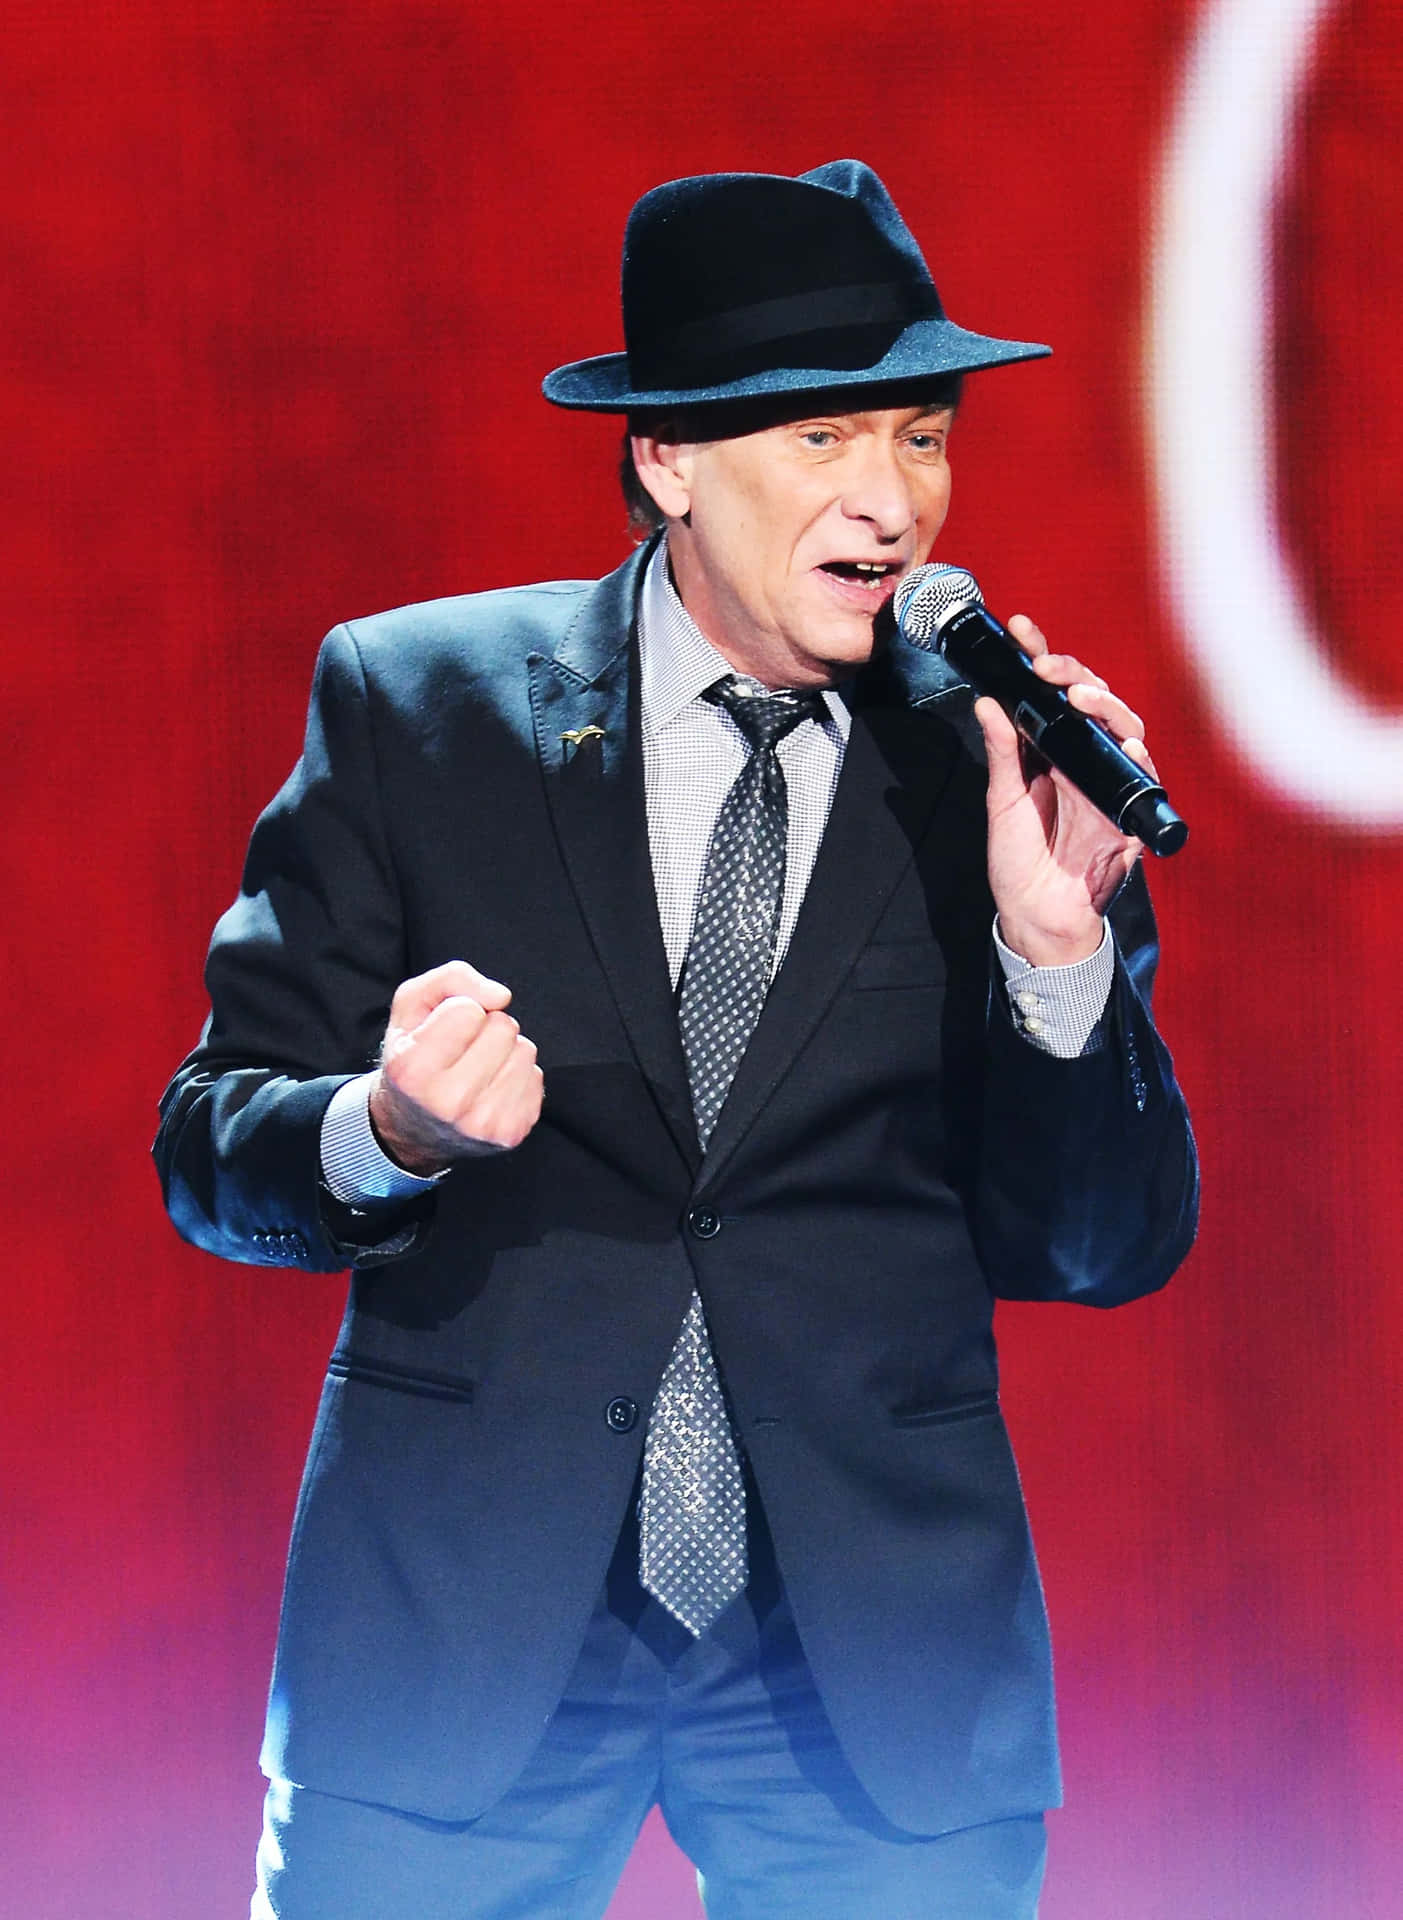 Bobby Caldwell performing live at an event Wallpaper